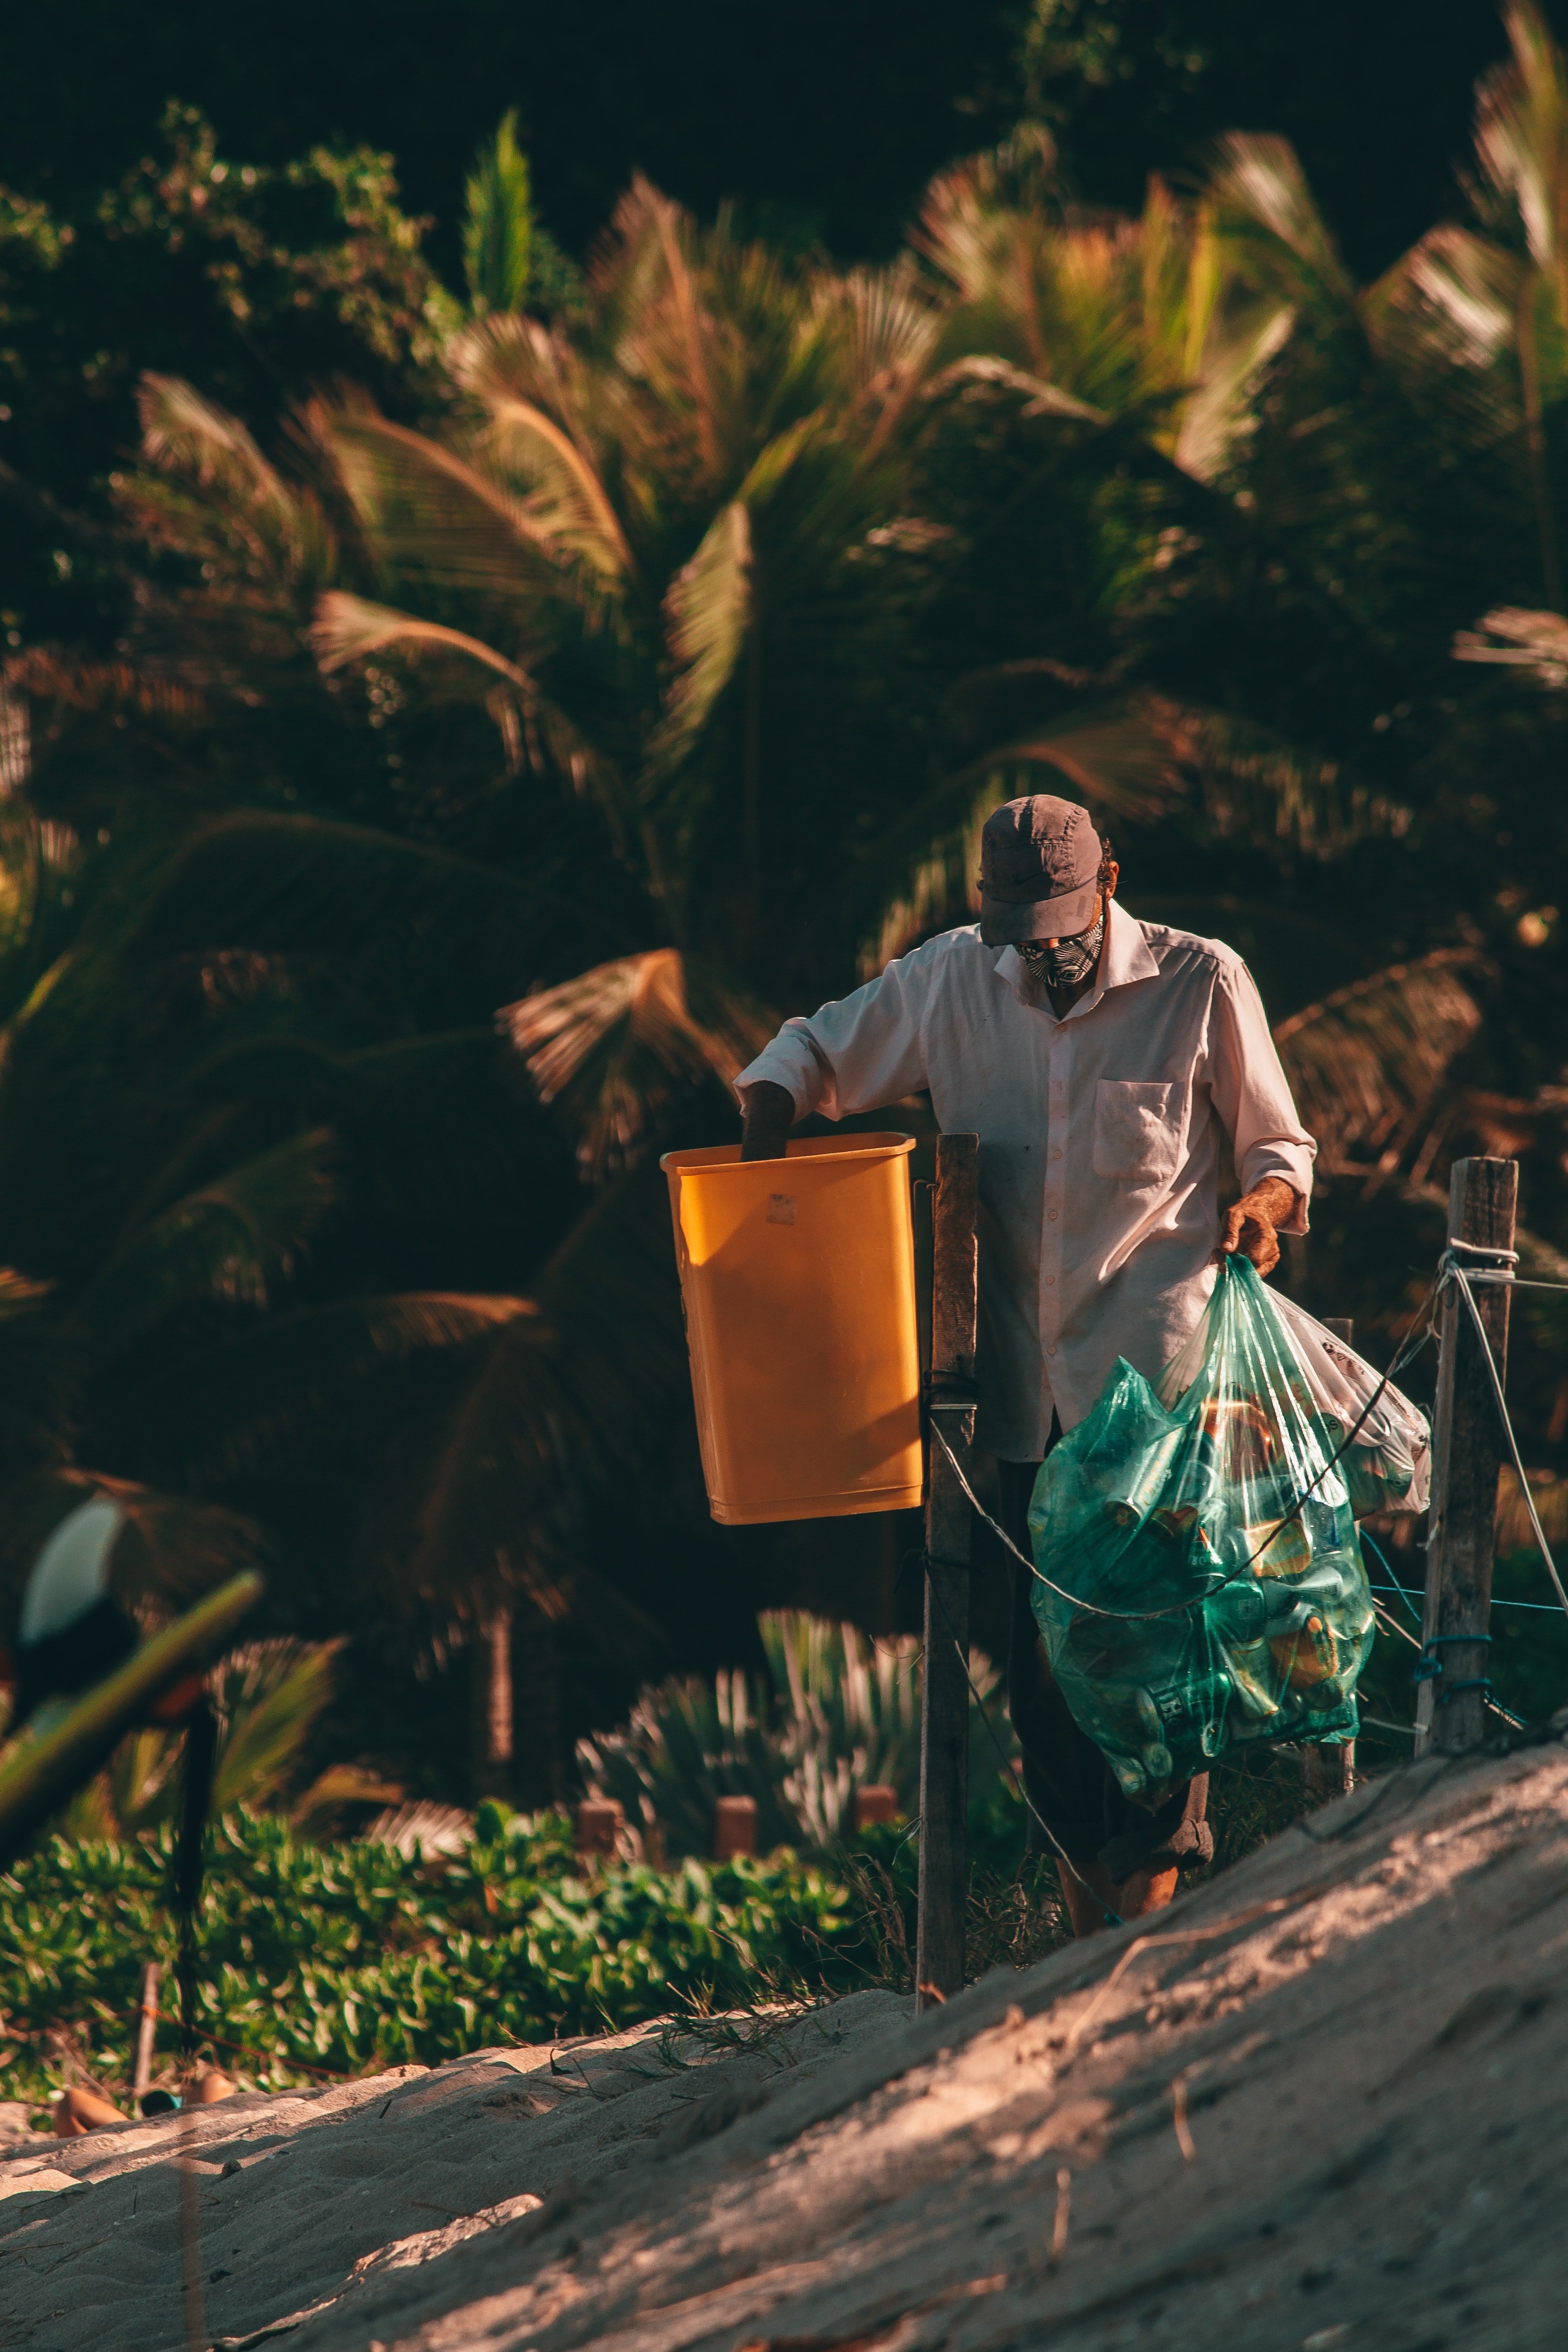 Peter worked as a park cleaner. | Source: Pexels